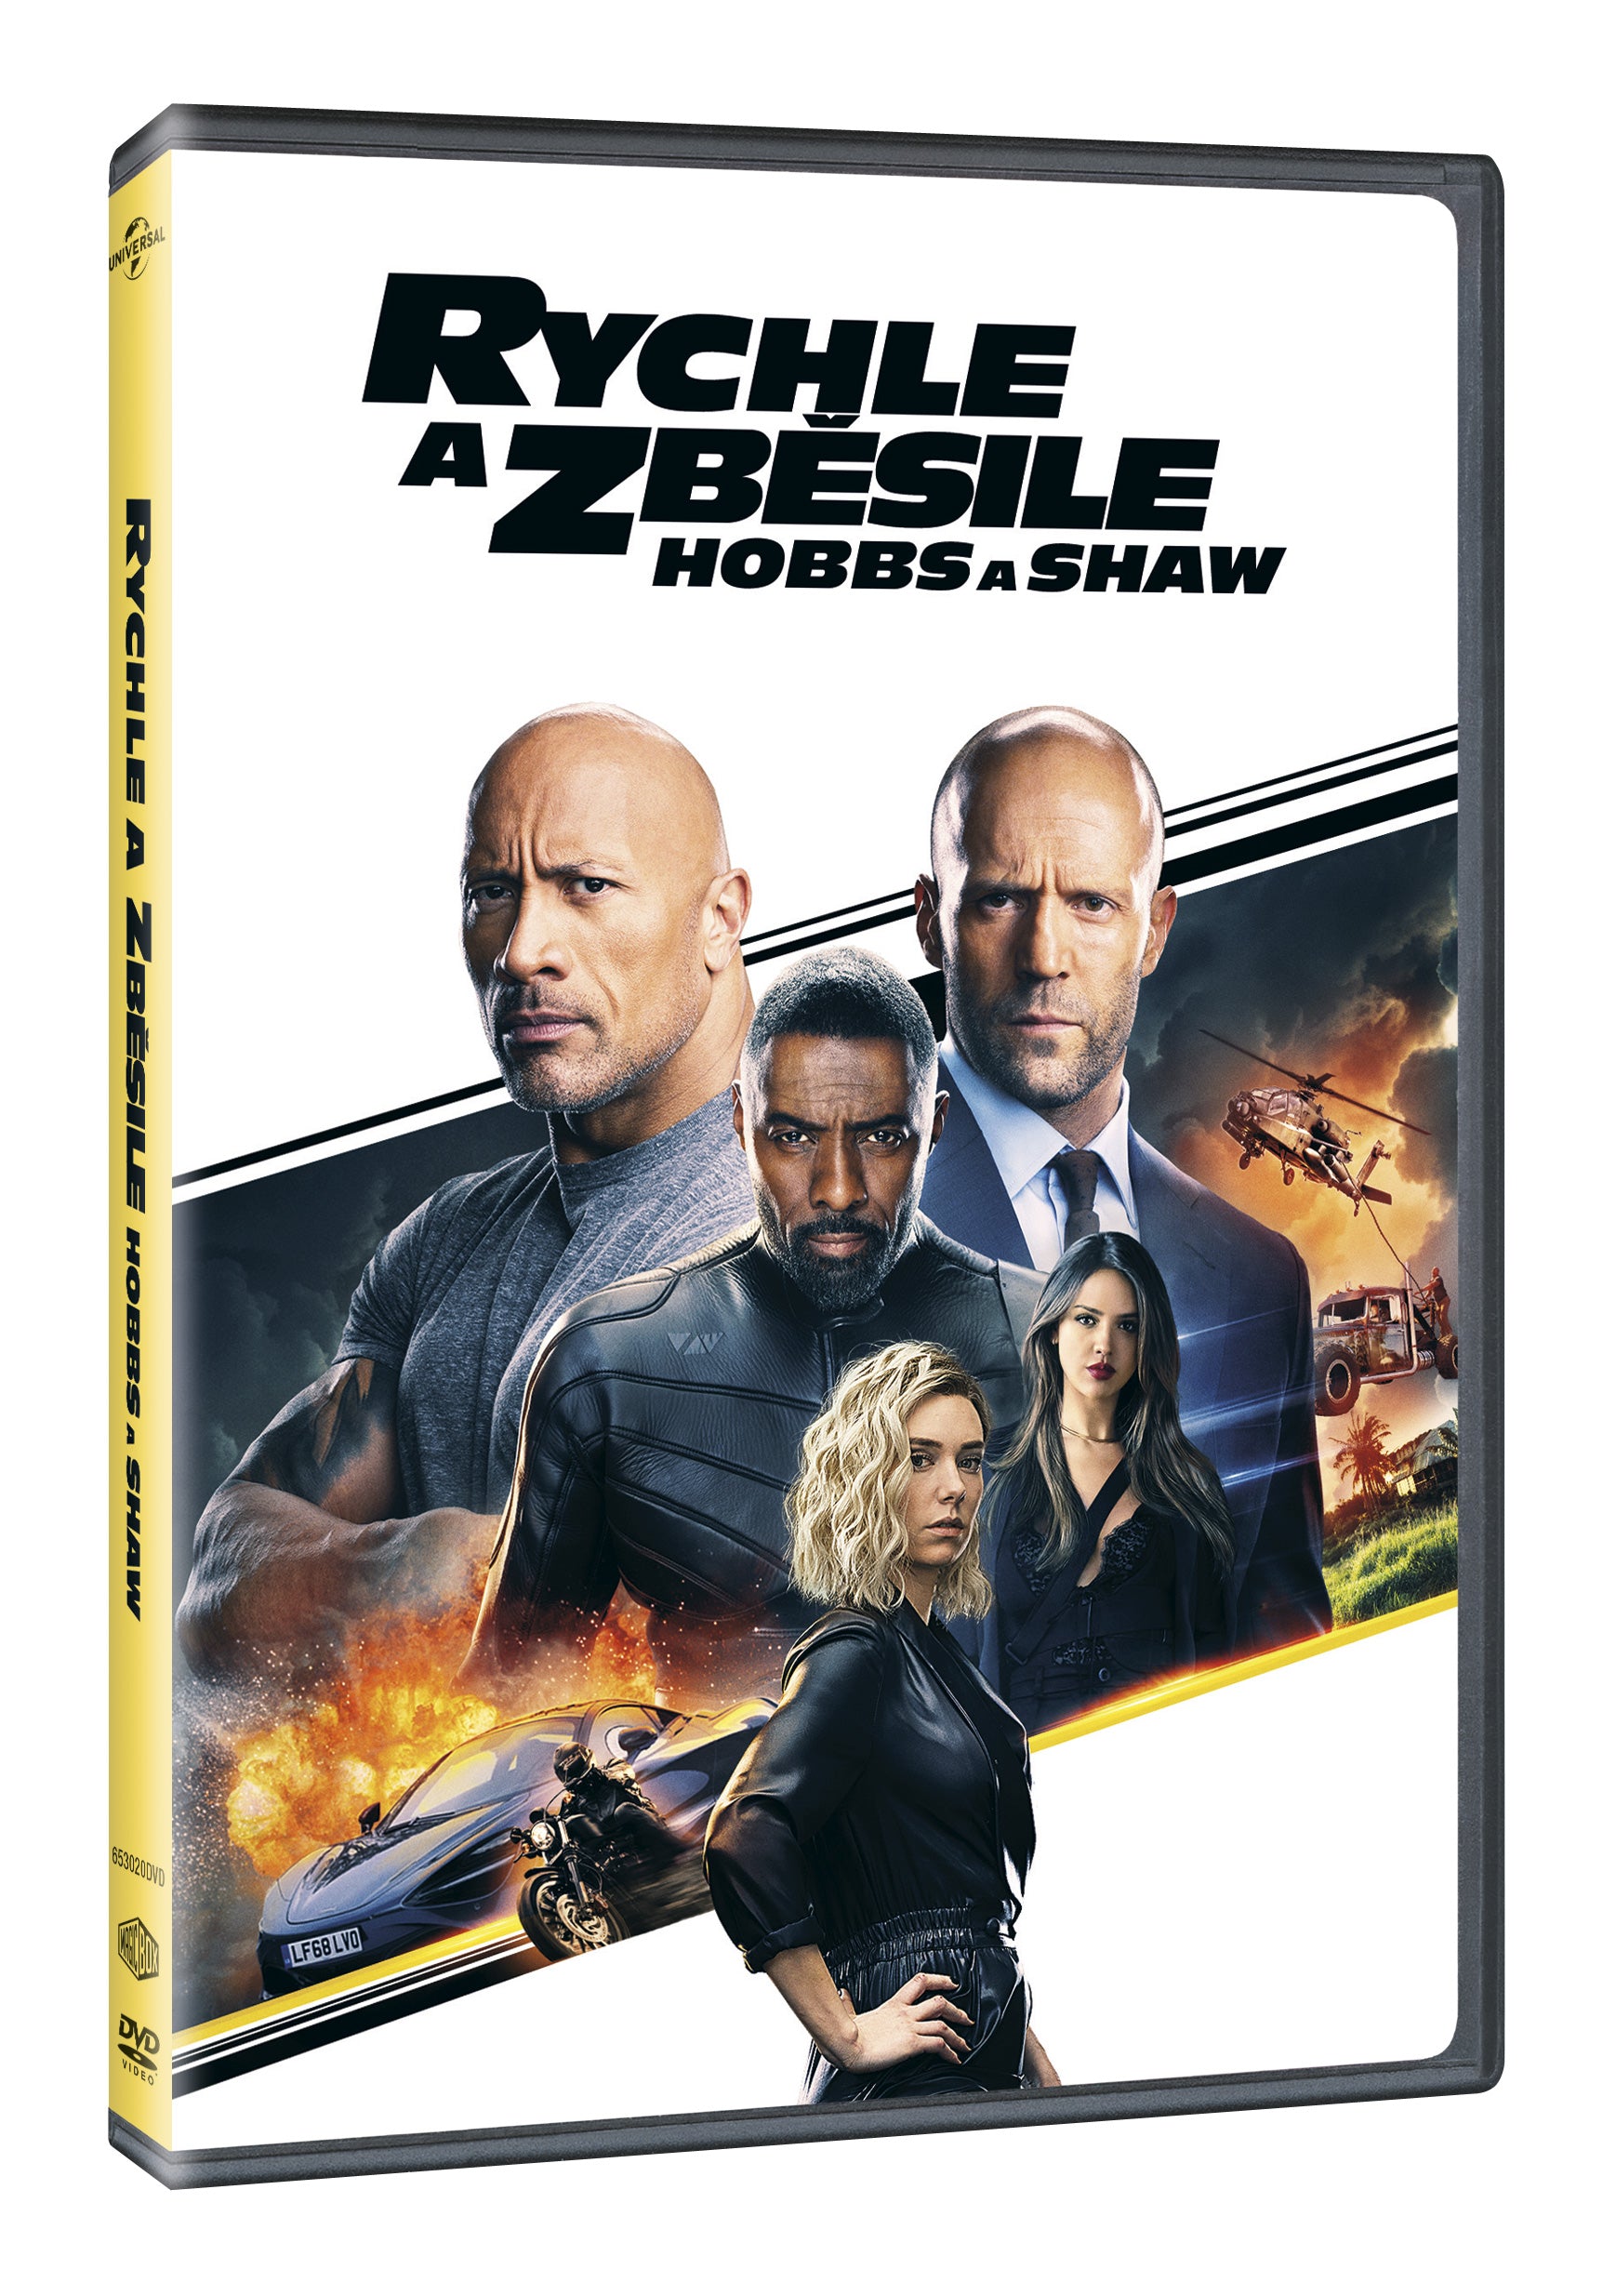 Rychle a zbesile: Hobbs a Shaw DVD / Fast &amp; Furious Presents: Hobbs &amp; Shaw